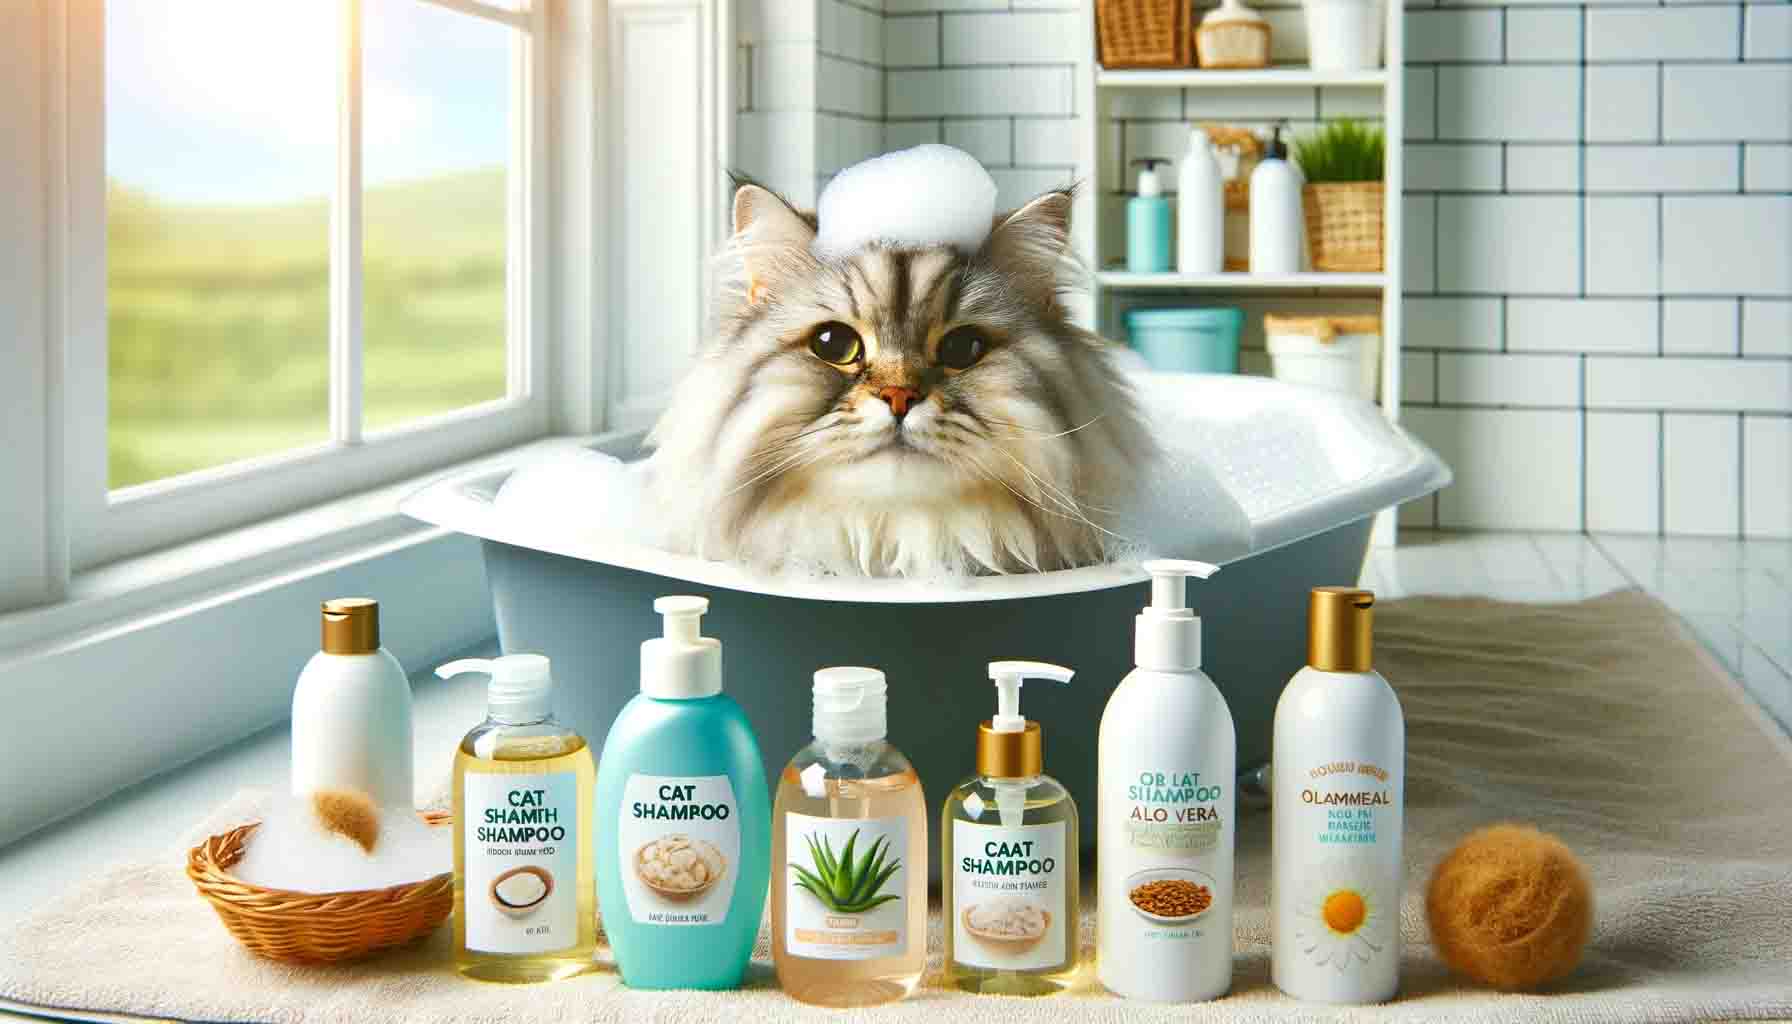 How to Find the Best Shampoo for Your Cat